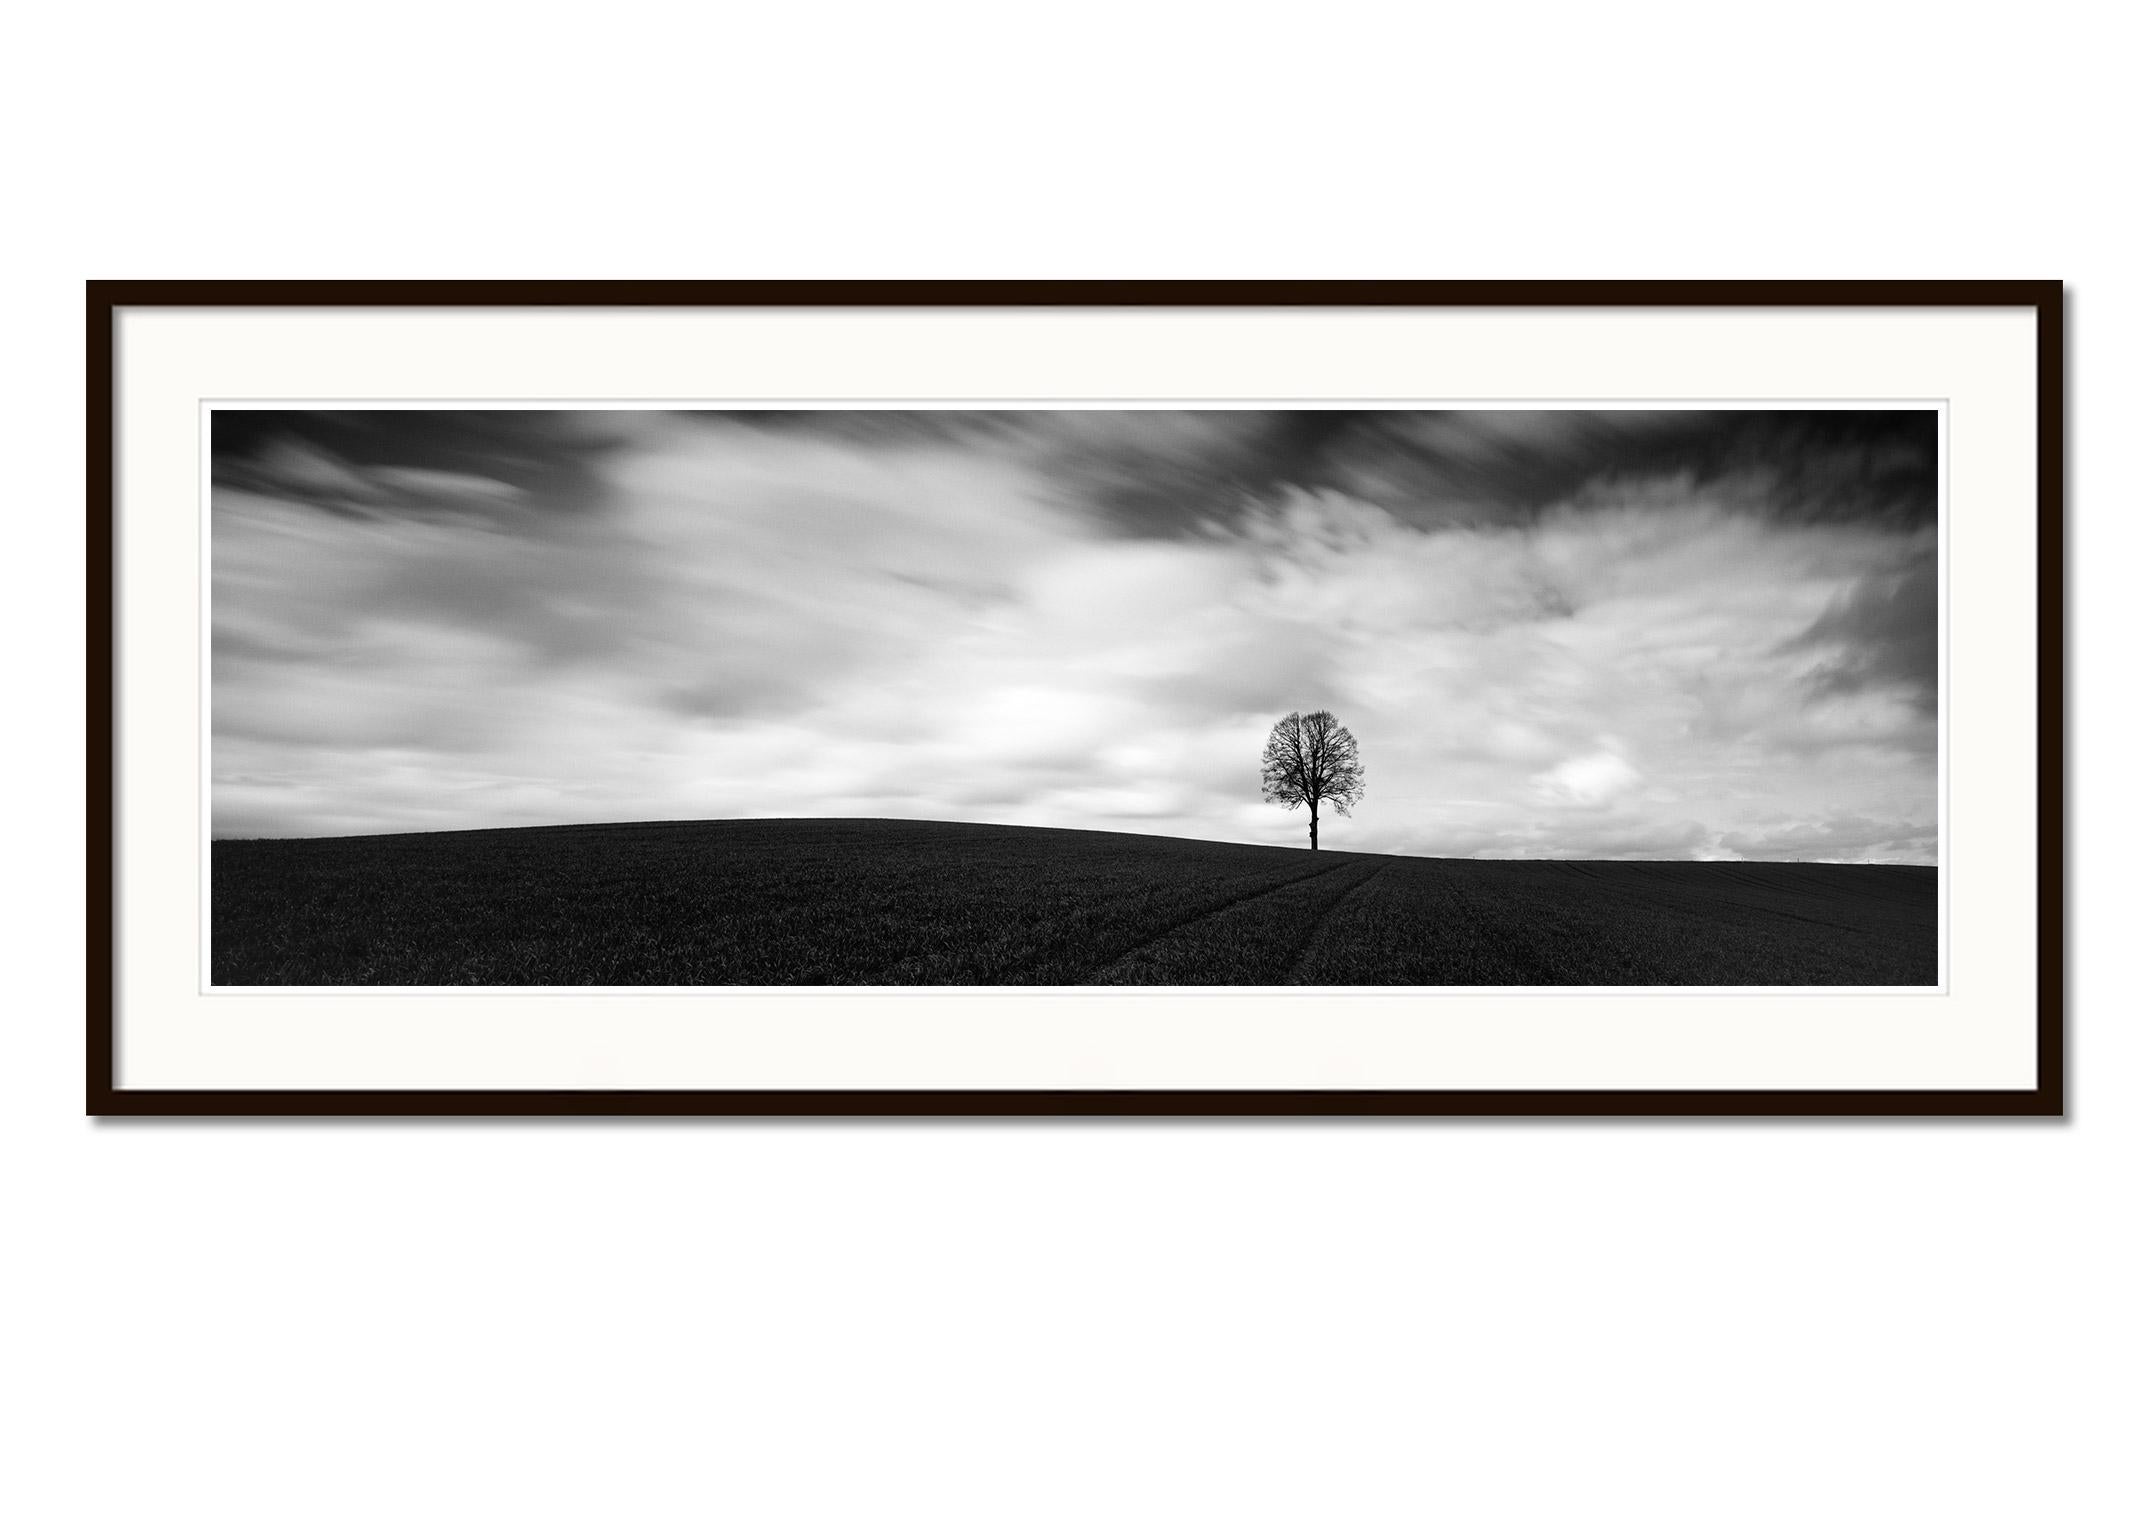 Farmland Panorama, single tree, field, black and white, landscape, photography - Contemporary Photograph by Gerald Berghammer